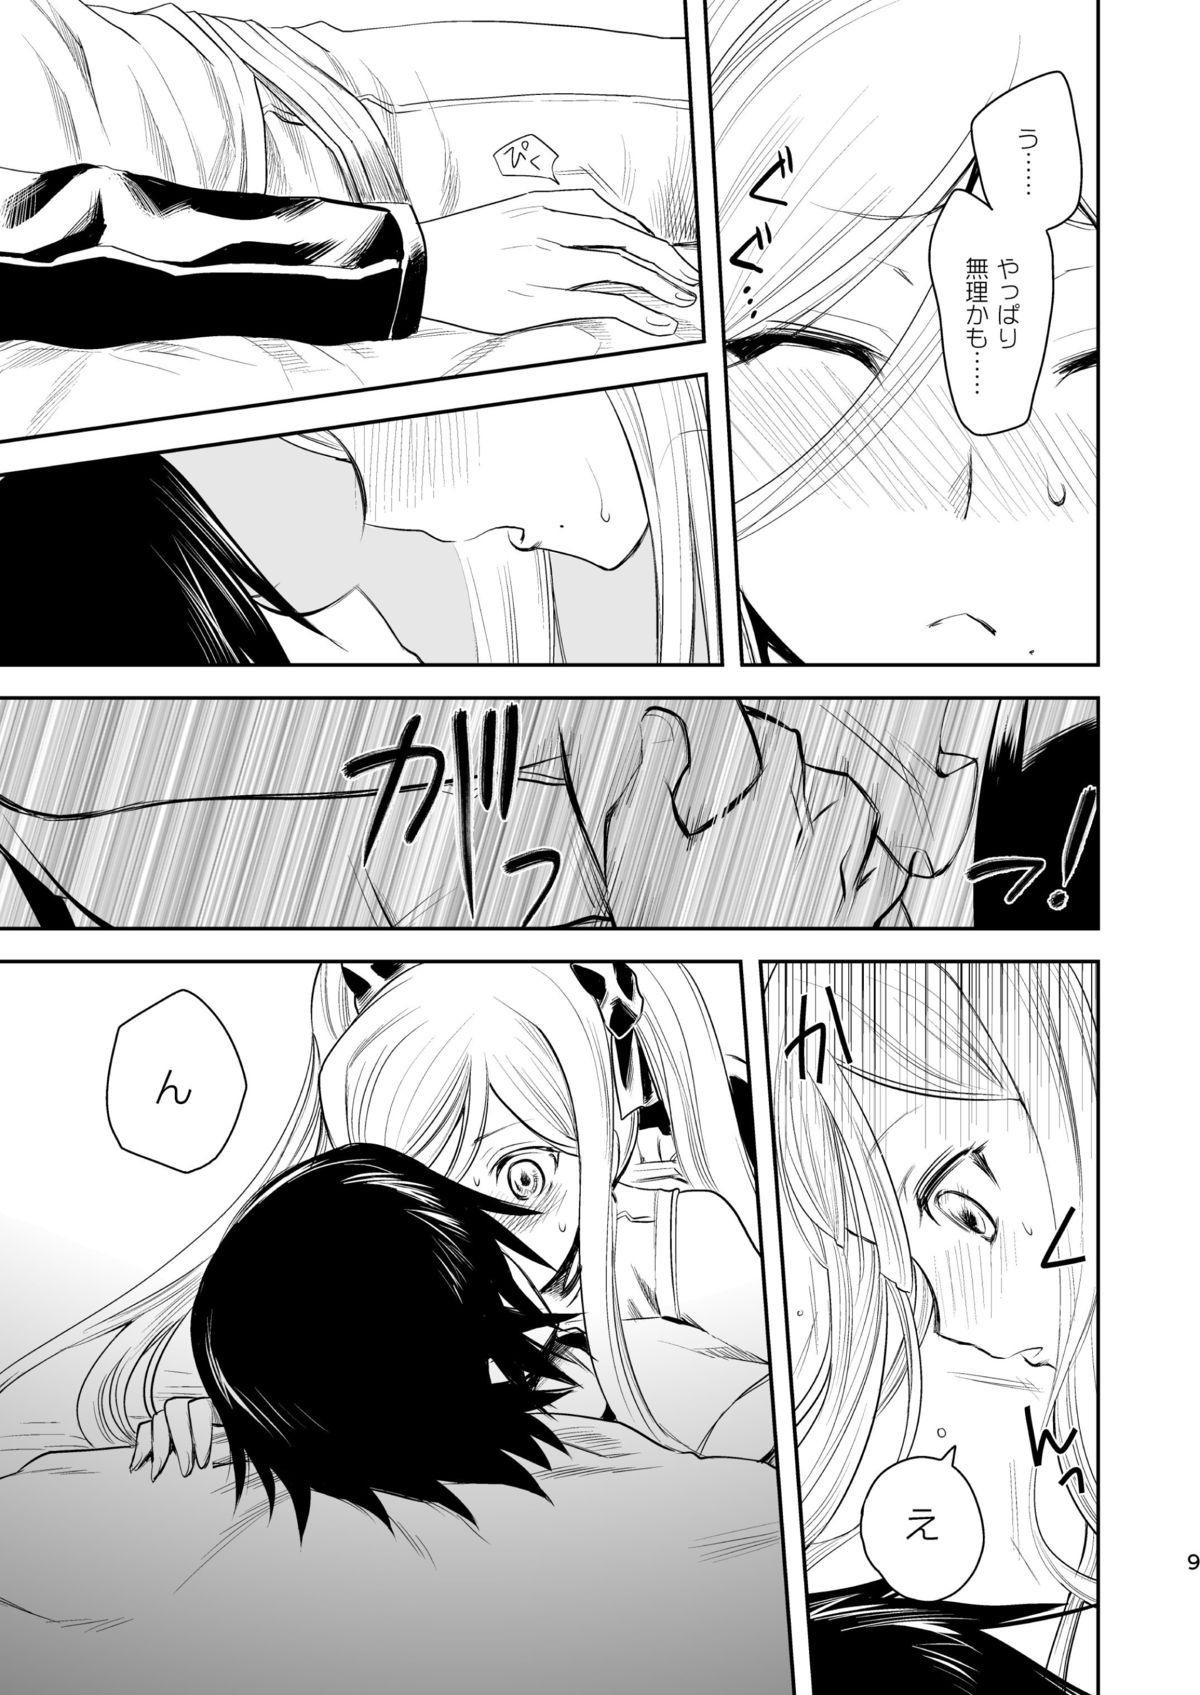 Interacial Now Updating! - Arpeggio of blue steel Hot Girl Fucking - Page 8